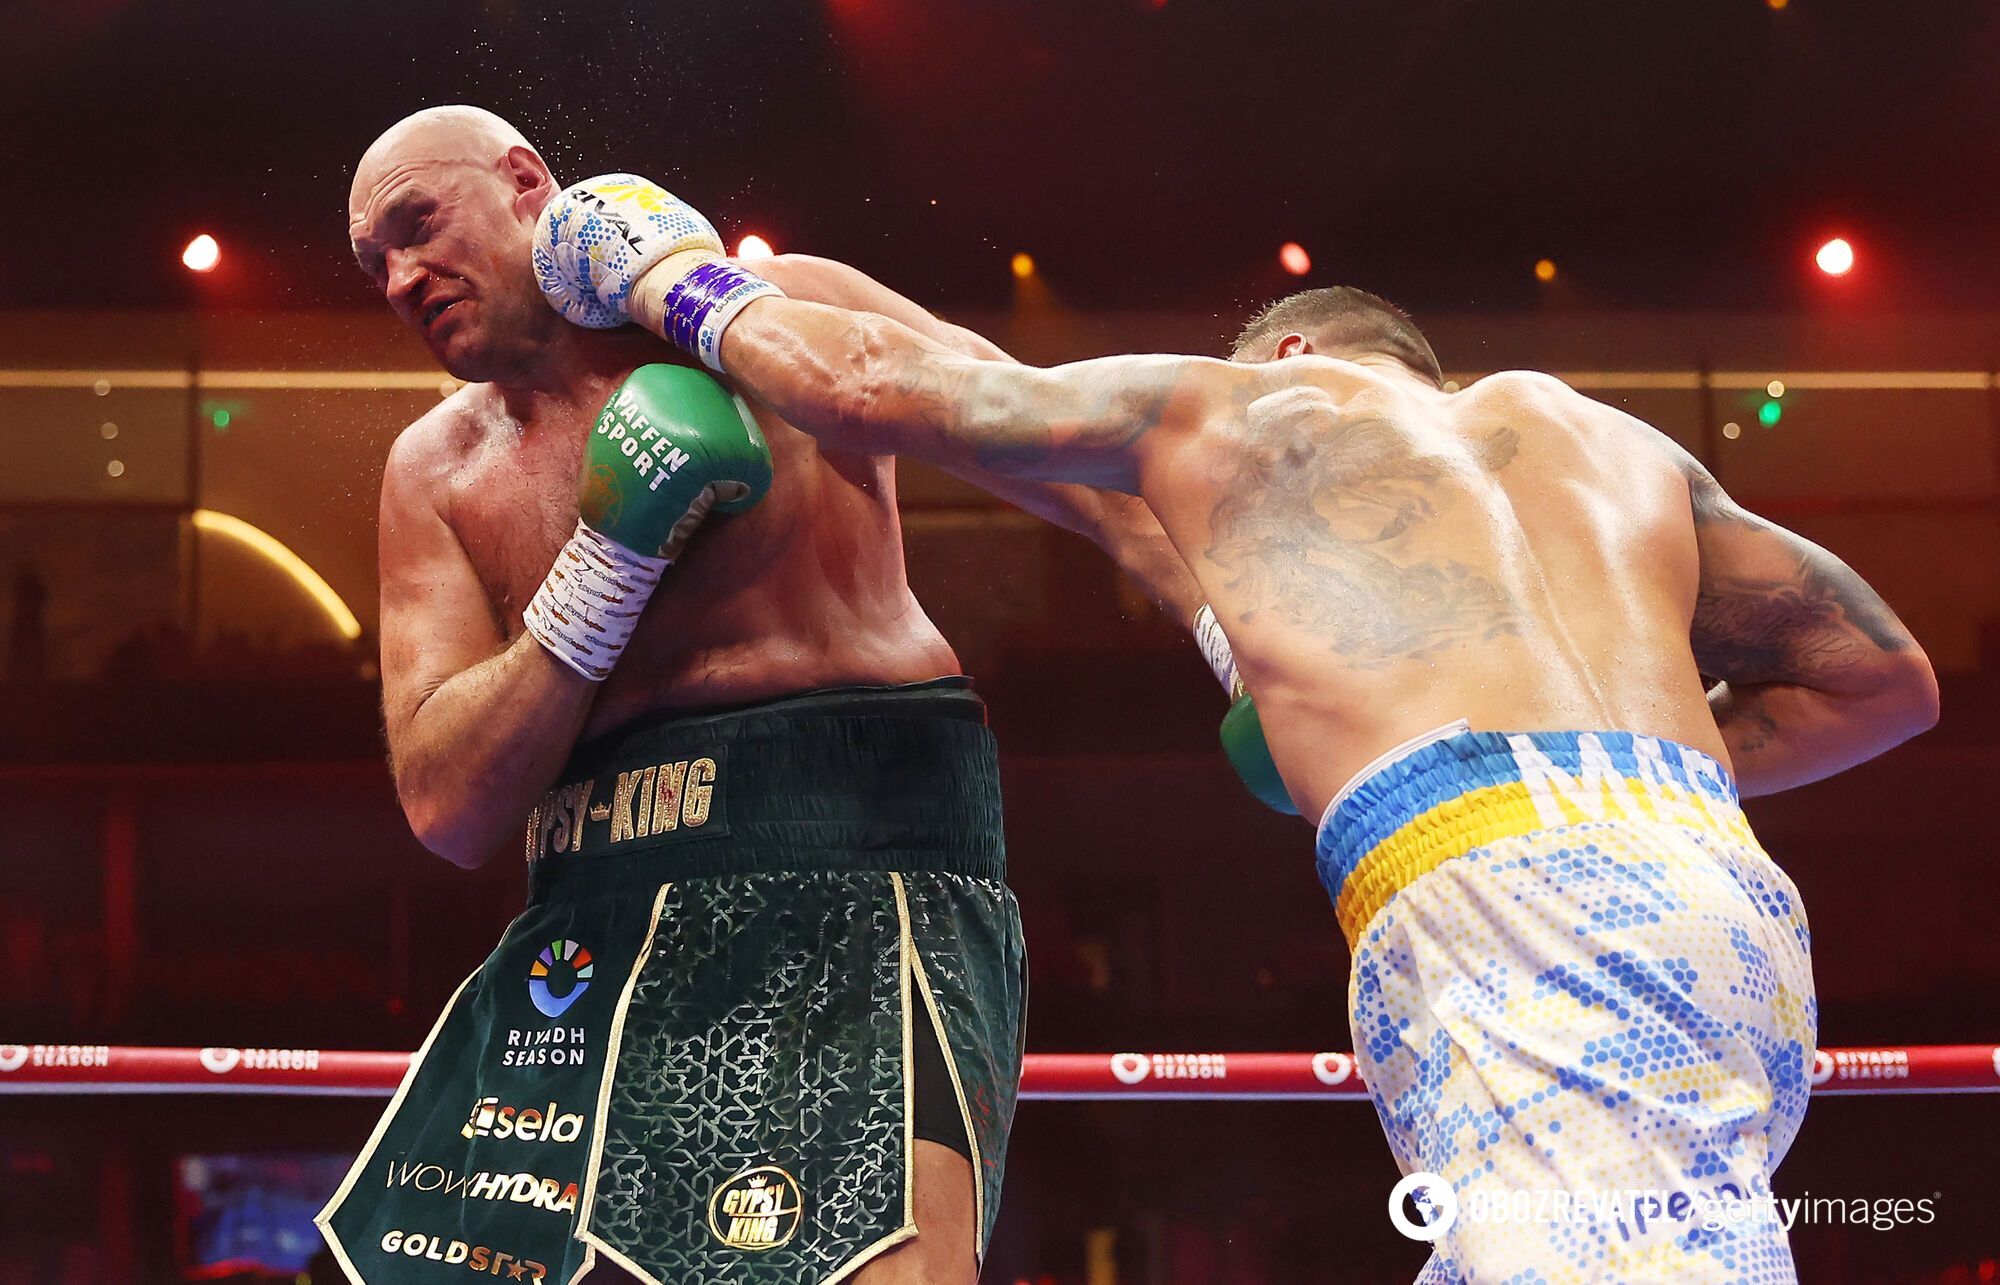 Usyk's action after the fight with Fury shocked Vacca. Video